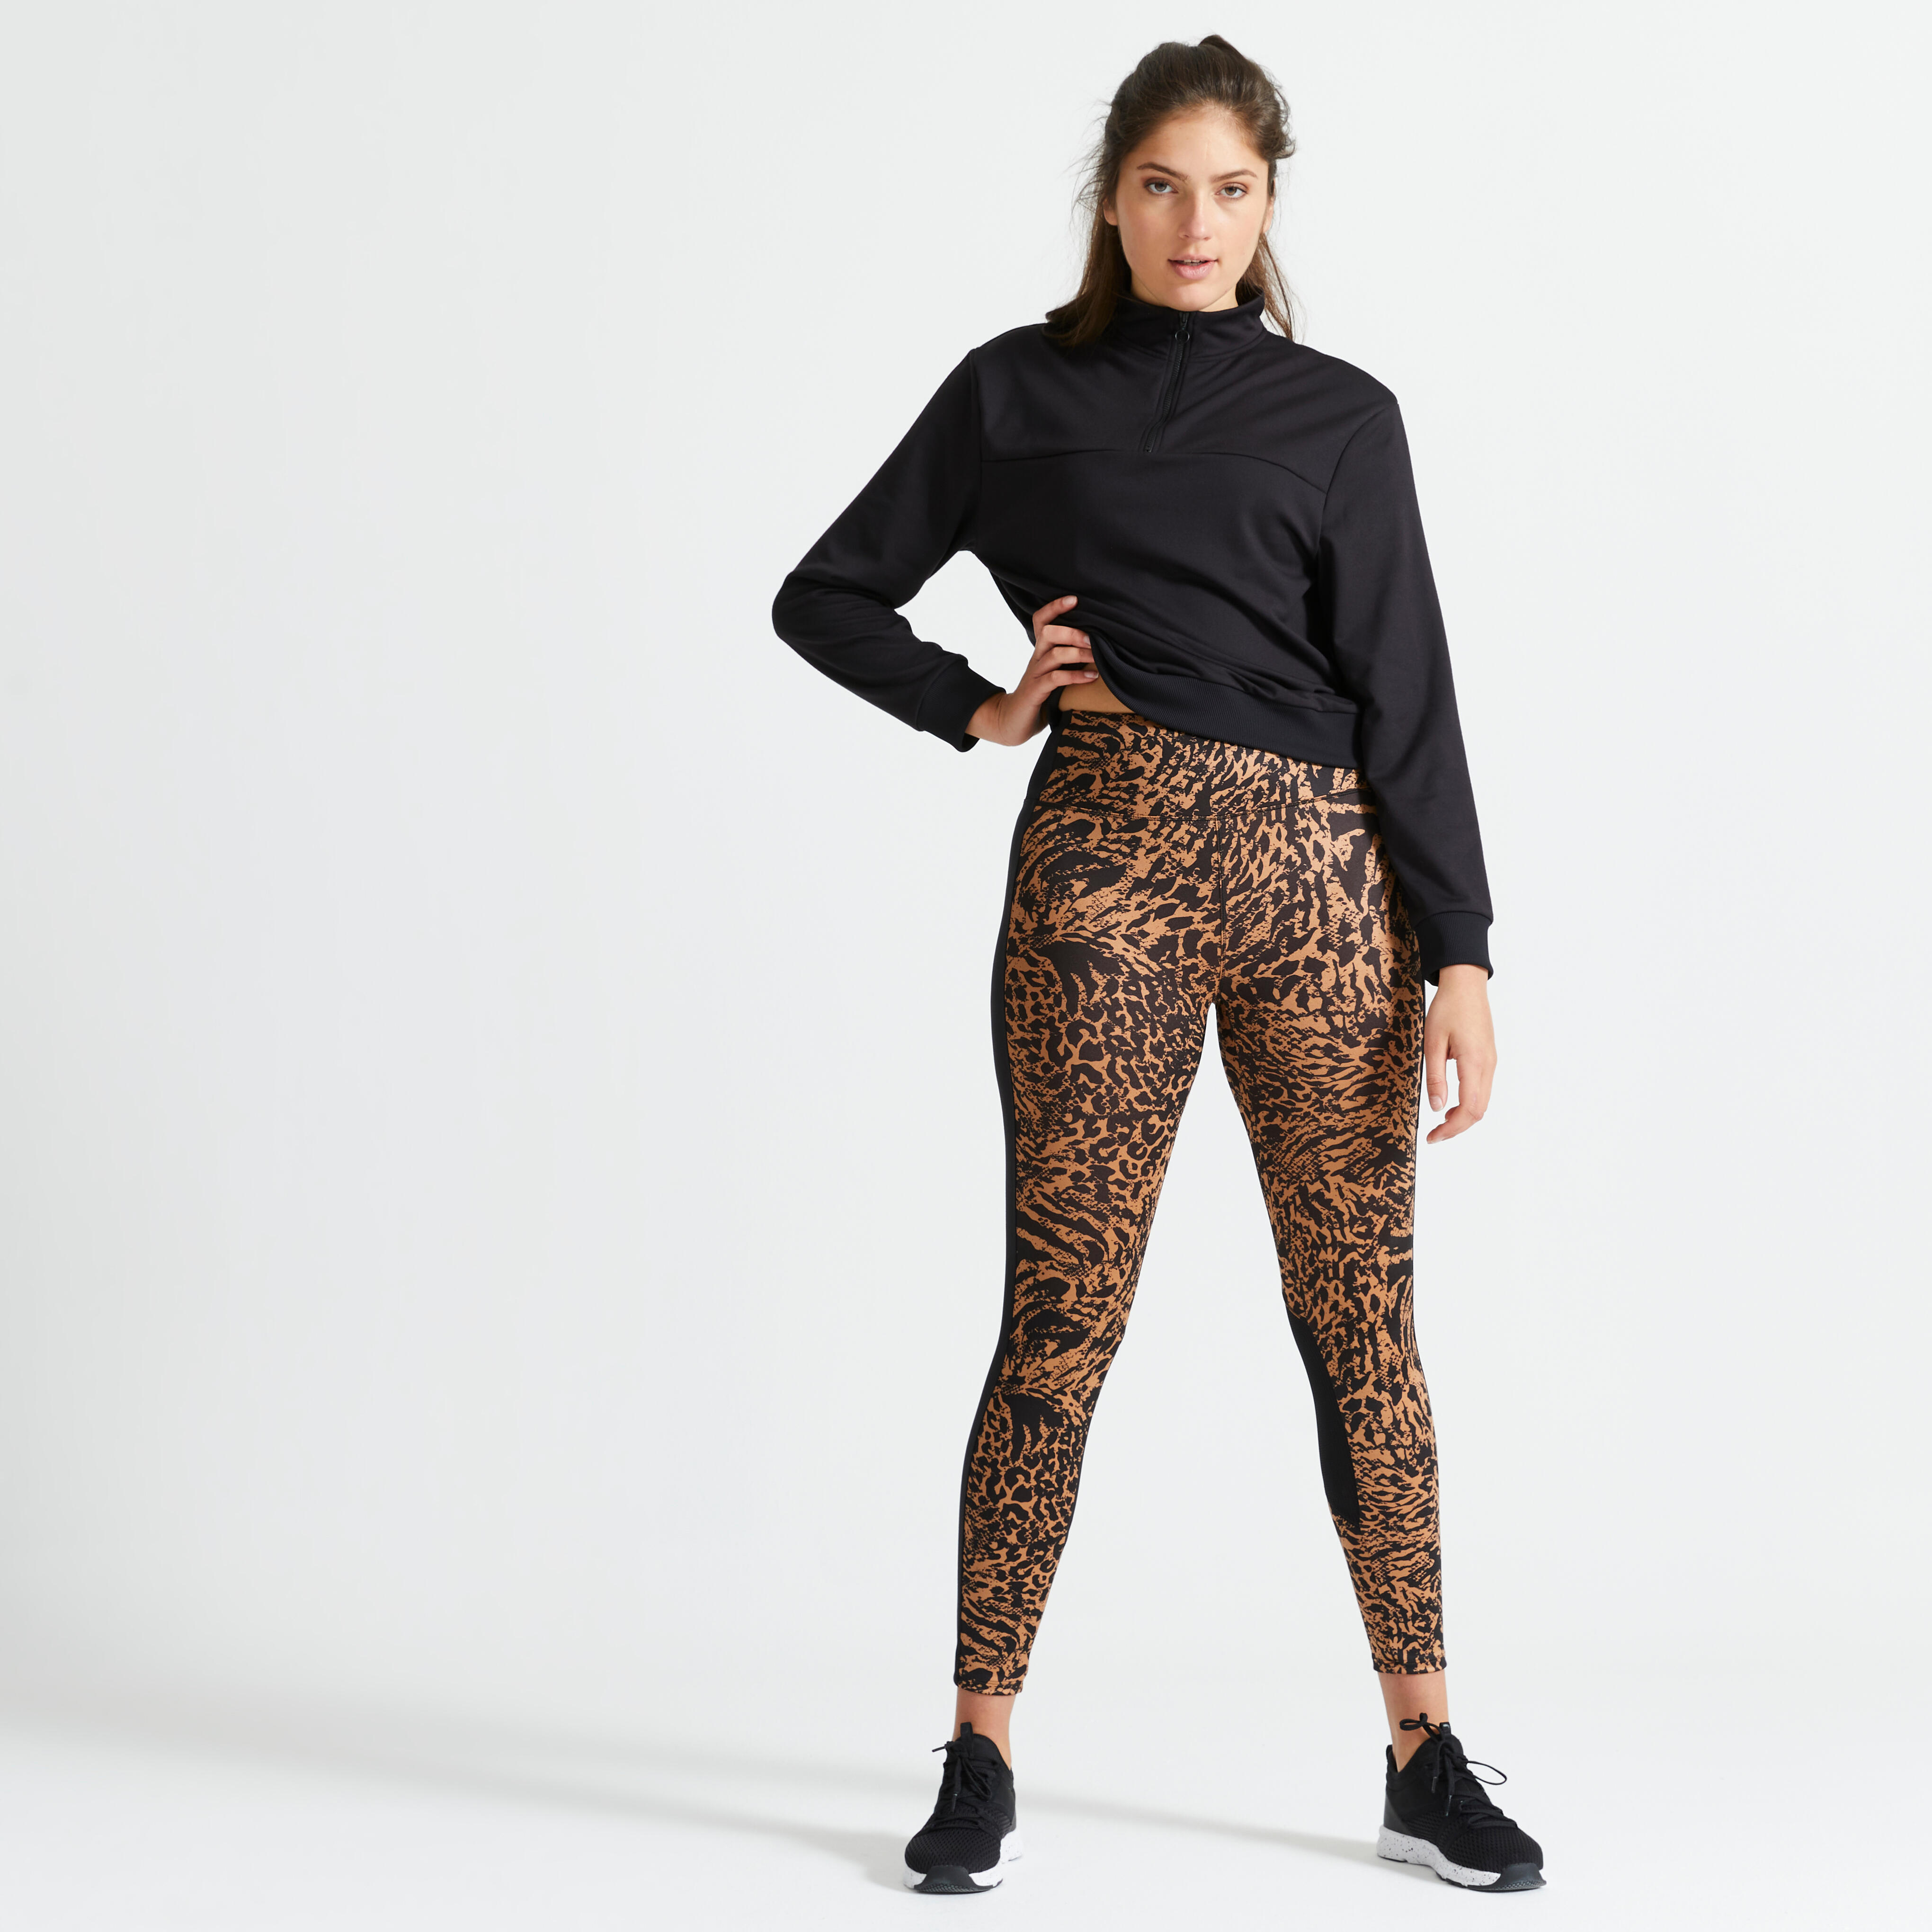 Women's Active XL Leopard Print Workout Leggings. (3 Pack) • Flat high rise  waistband smoothes & supports the tummy • Hidden waistband pocket for keys,  phone, cash • Vibrant cheetah print •